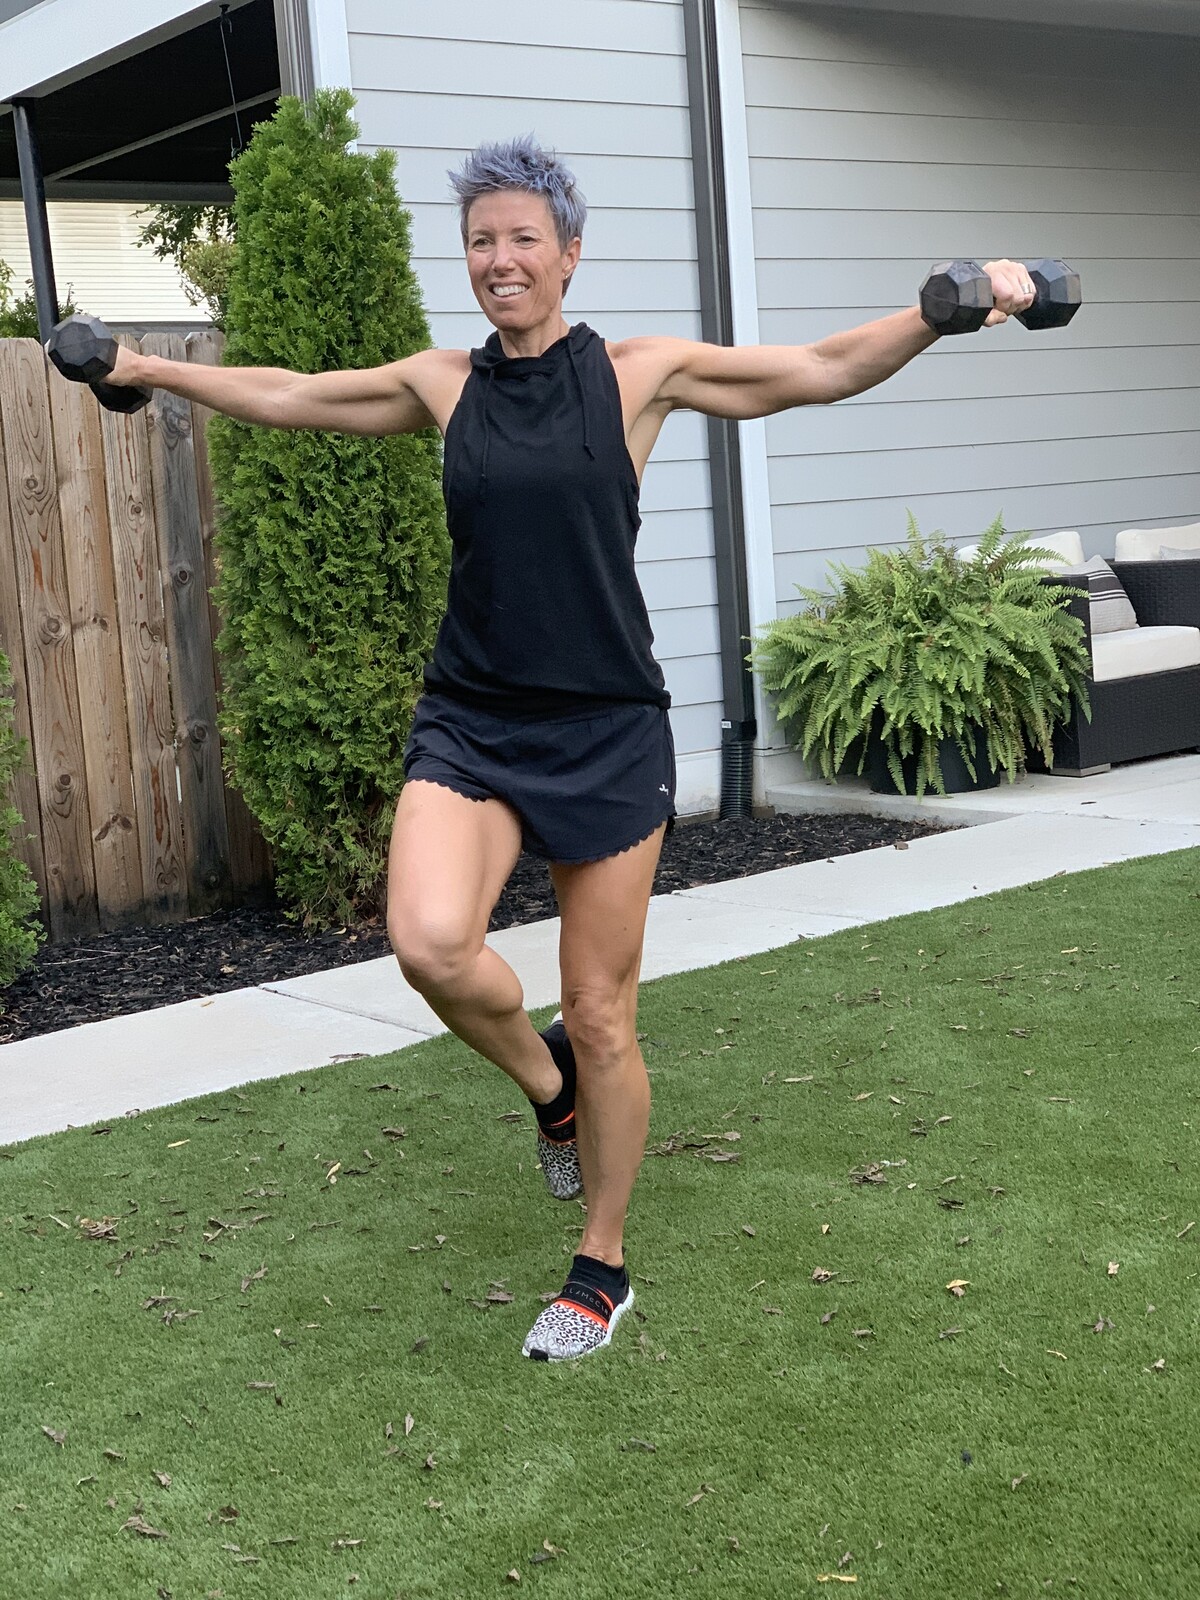 Trainer to the Country Stars Erin Oprea Gives 5 Simple Fitness Tips